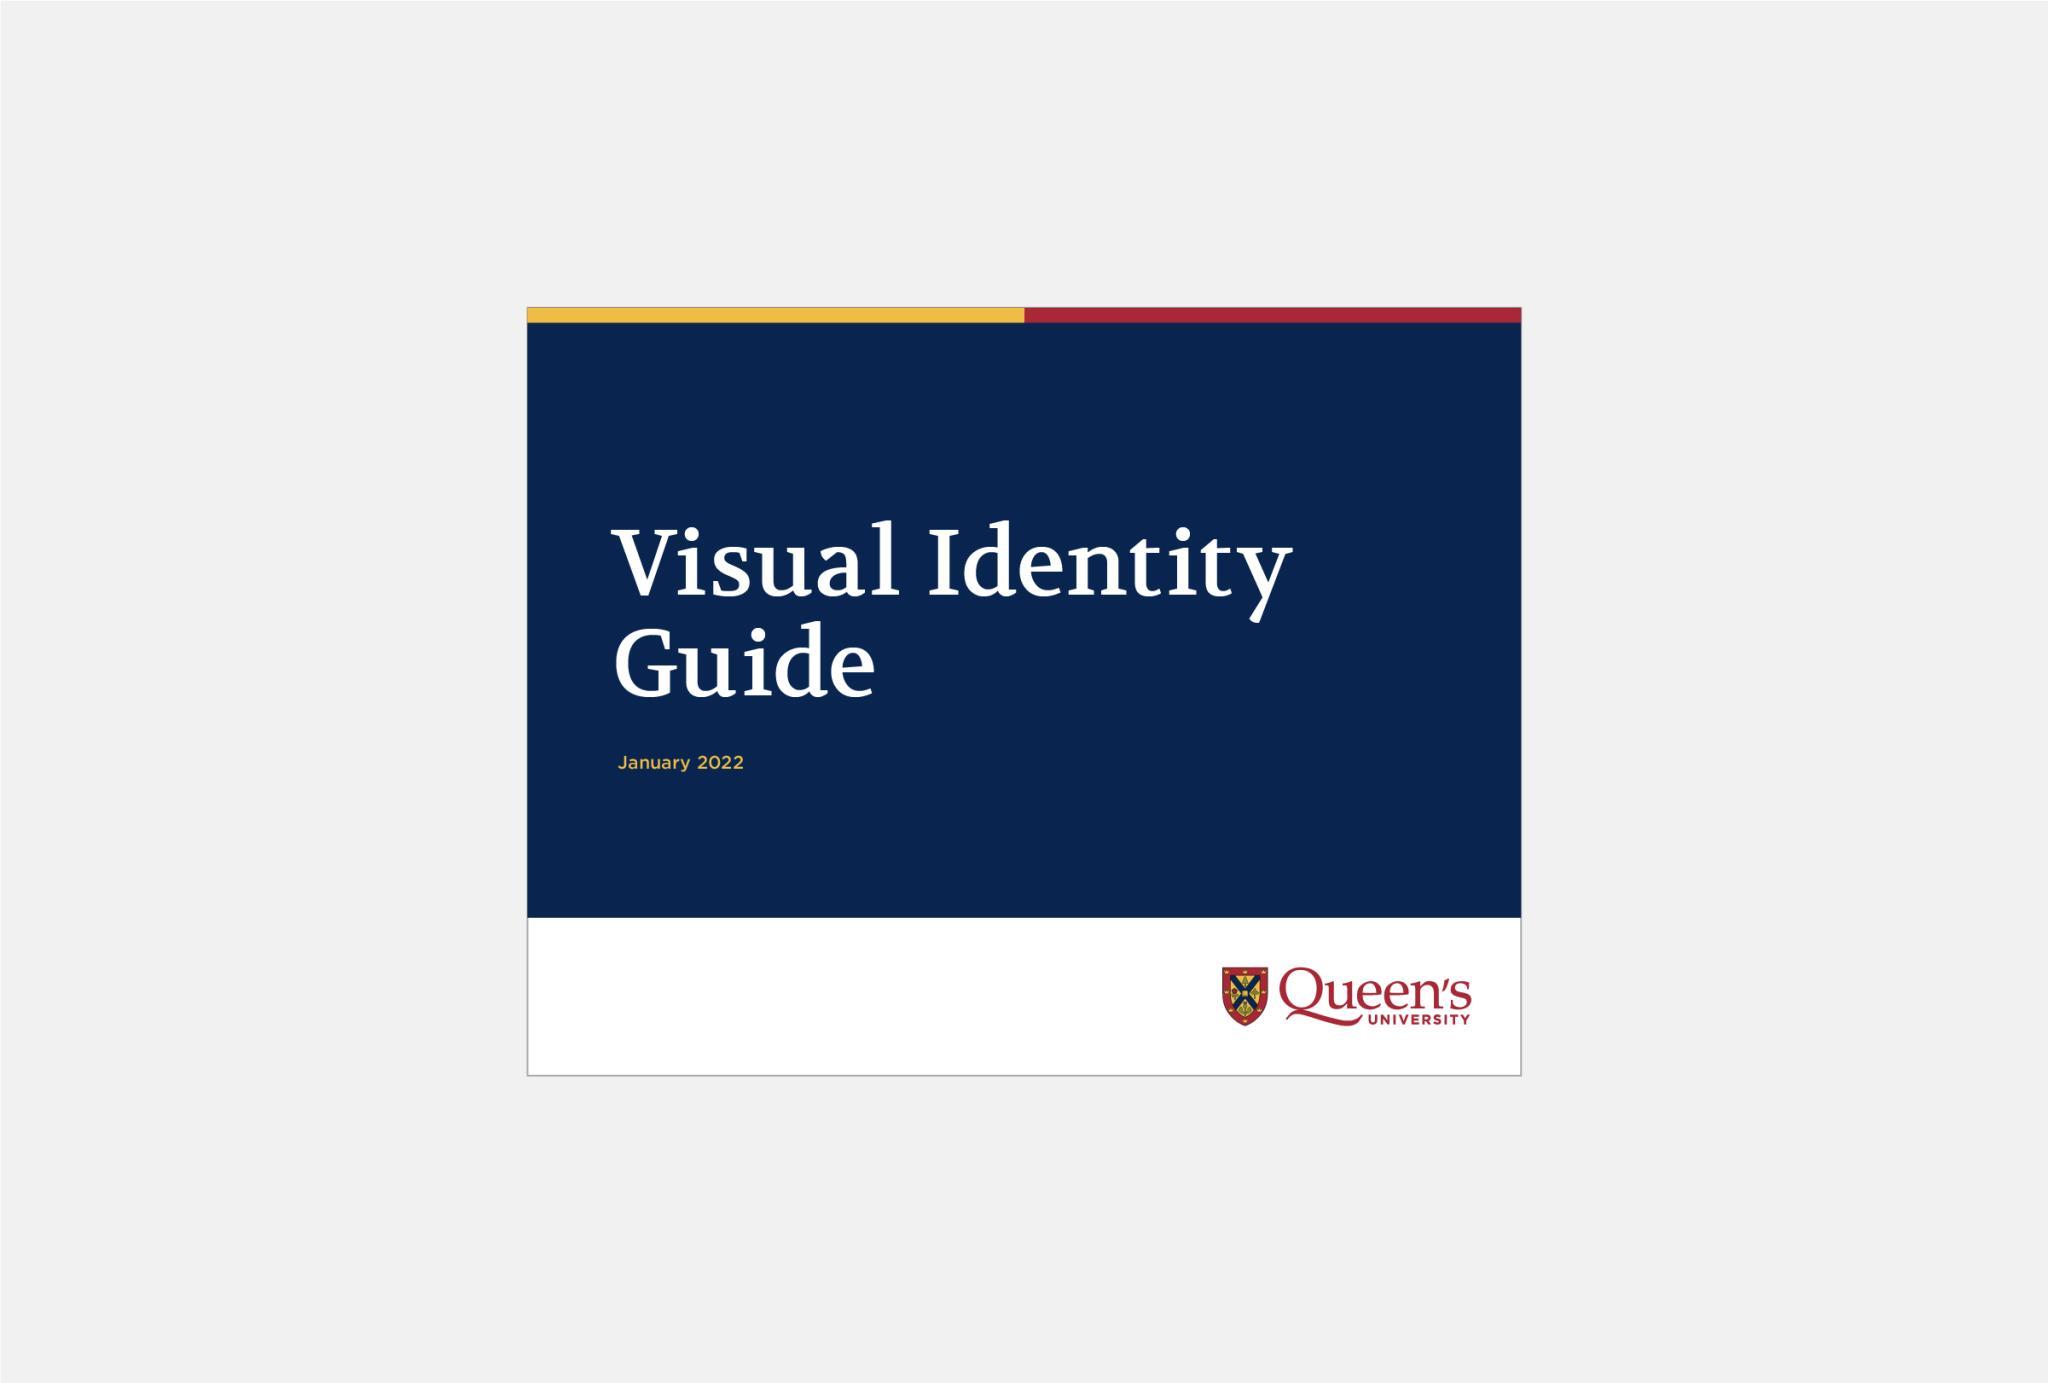 Queen's University visual identity guide 